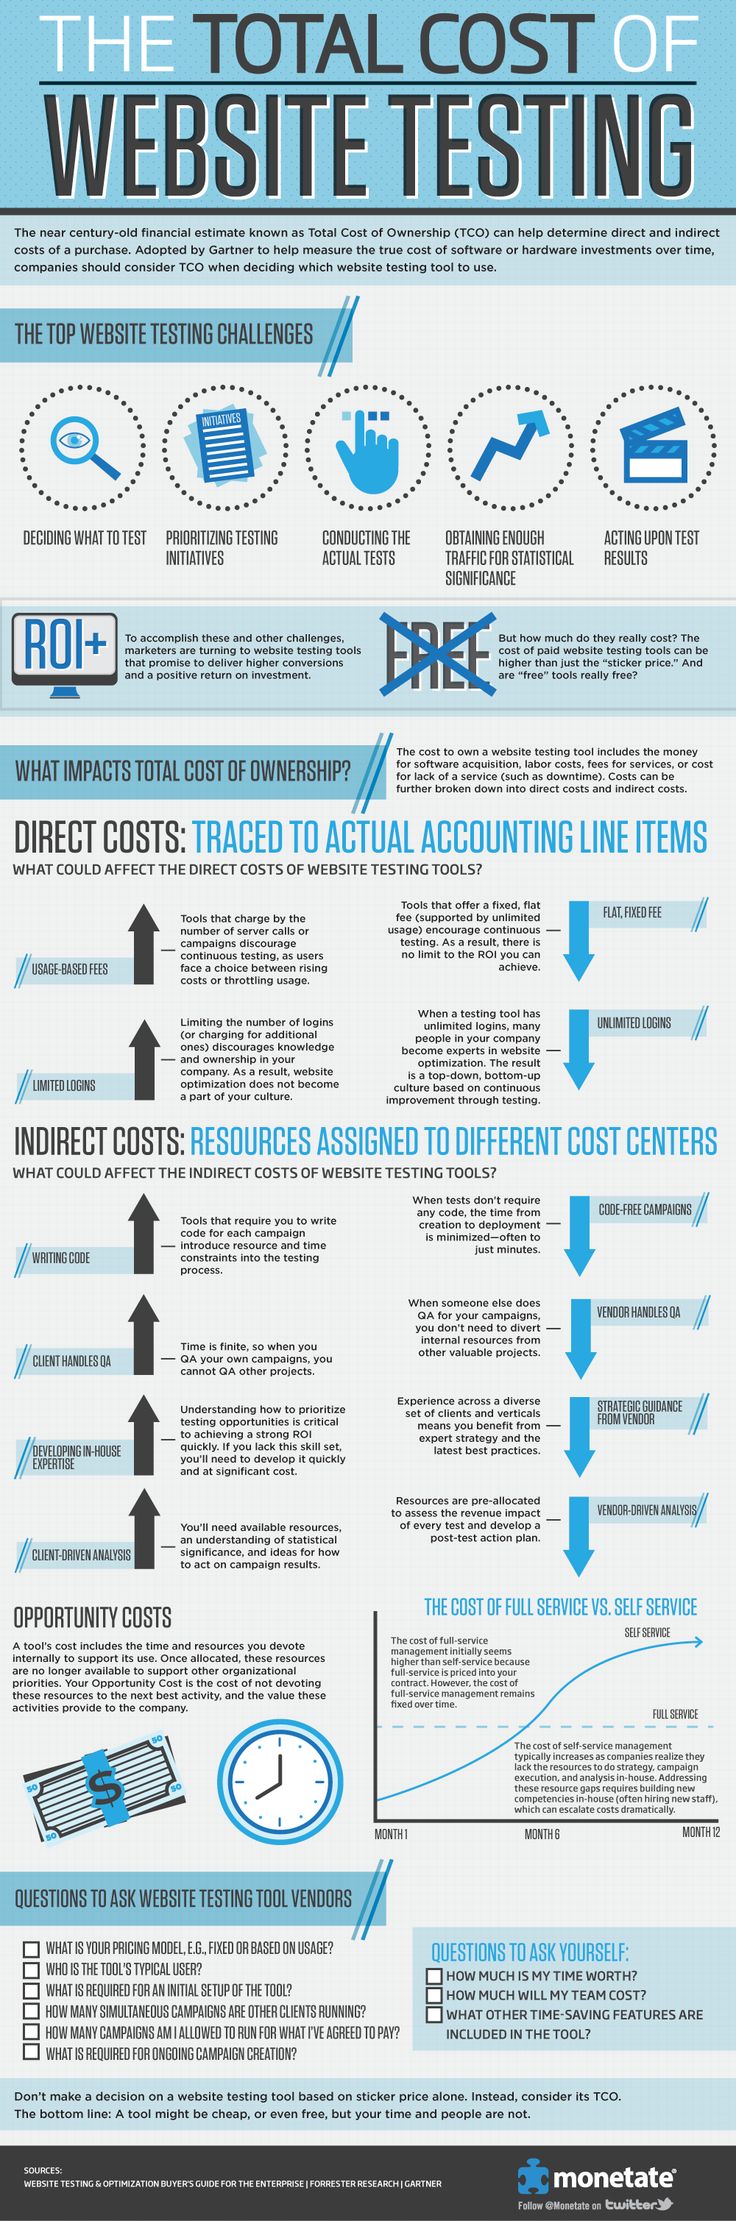 Digital-Marketing-Total-Cost-of-Ownership-Monetate-Infographic Digital Marketing : Total Cost of Ownership: Monetate #Infographic